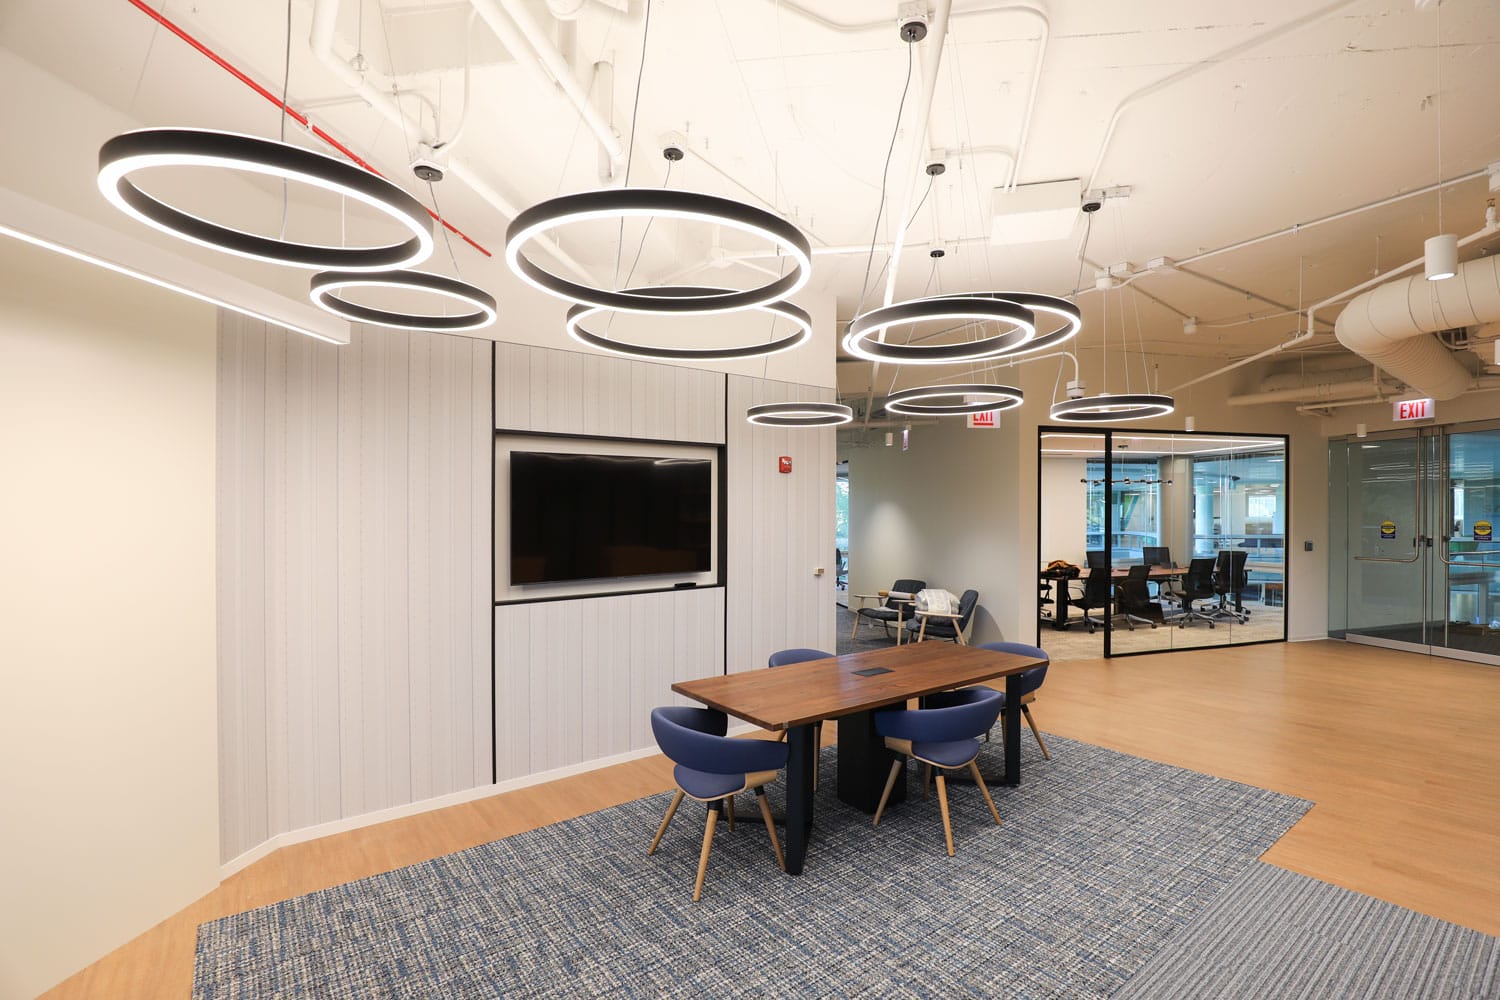 Skender Completes Interior Construction of IDEX Corporation HQ in Northbrook, Illinois